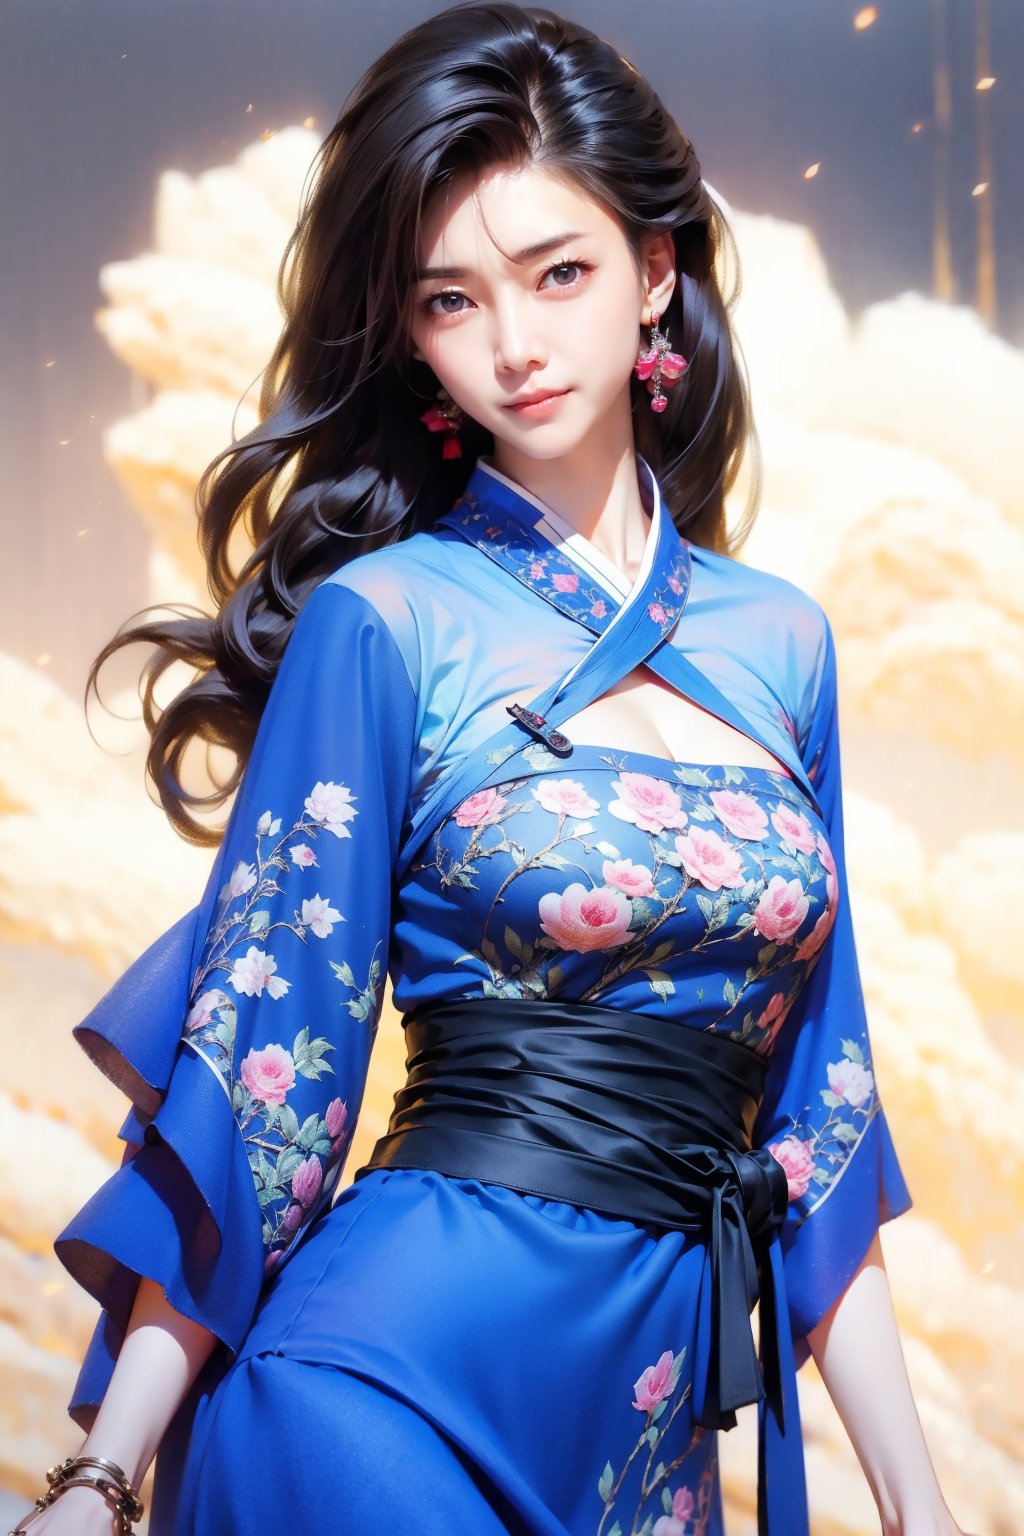 1 girl, most beautiful korean girl, Korean beauty model, idol face, gorgeous girl, 18yo, smiling, looking at viewer, ((Cowboy Shot: 1.5)), Full body, Best picture quality, high resolution, 16k, realistic, sharp focus, extreme picture quality, detailed face + eyes, casual pose, elegant, casual facial expression, realistic image of an elegant lady, no hair accessories, dark eyes , fractal art, bright colors, Korean beauty supermodel, pure white hair mixed with colorful hair tails, wearing Hanfu, wearing high-heeled sandals, radiant, perfectly customized gorgeous floral embroidery pattern suit, custom design, tense , looking at the audience, floral print, CLOUD,YukiU01